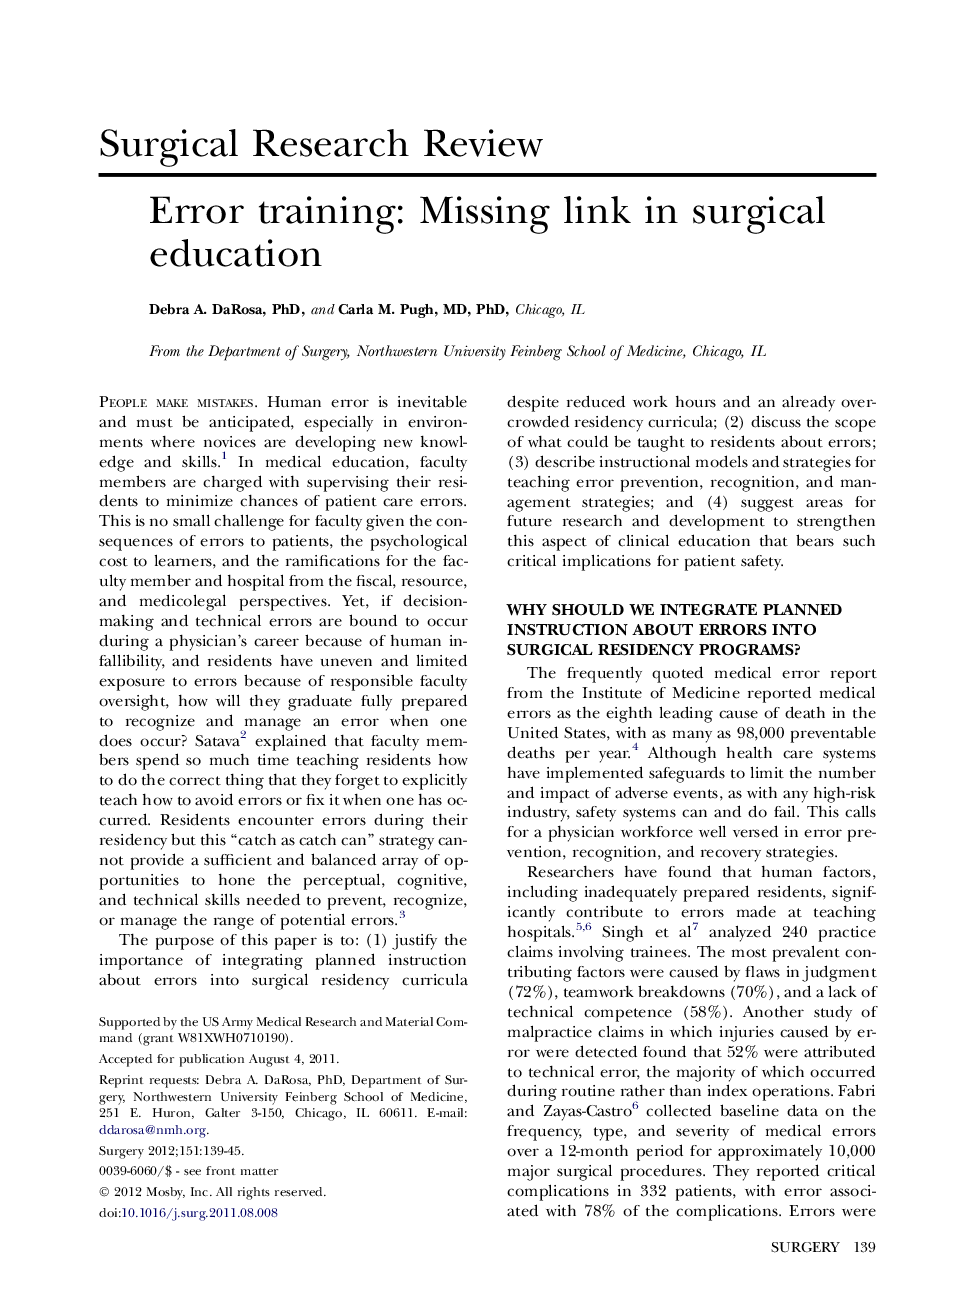 Error training: Missing link in surgical education